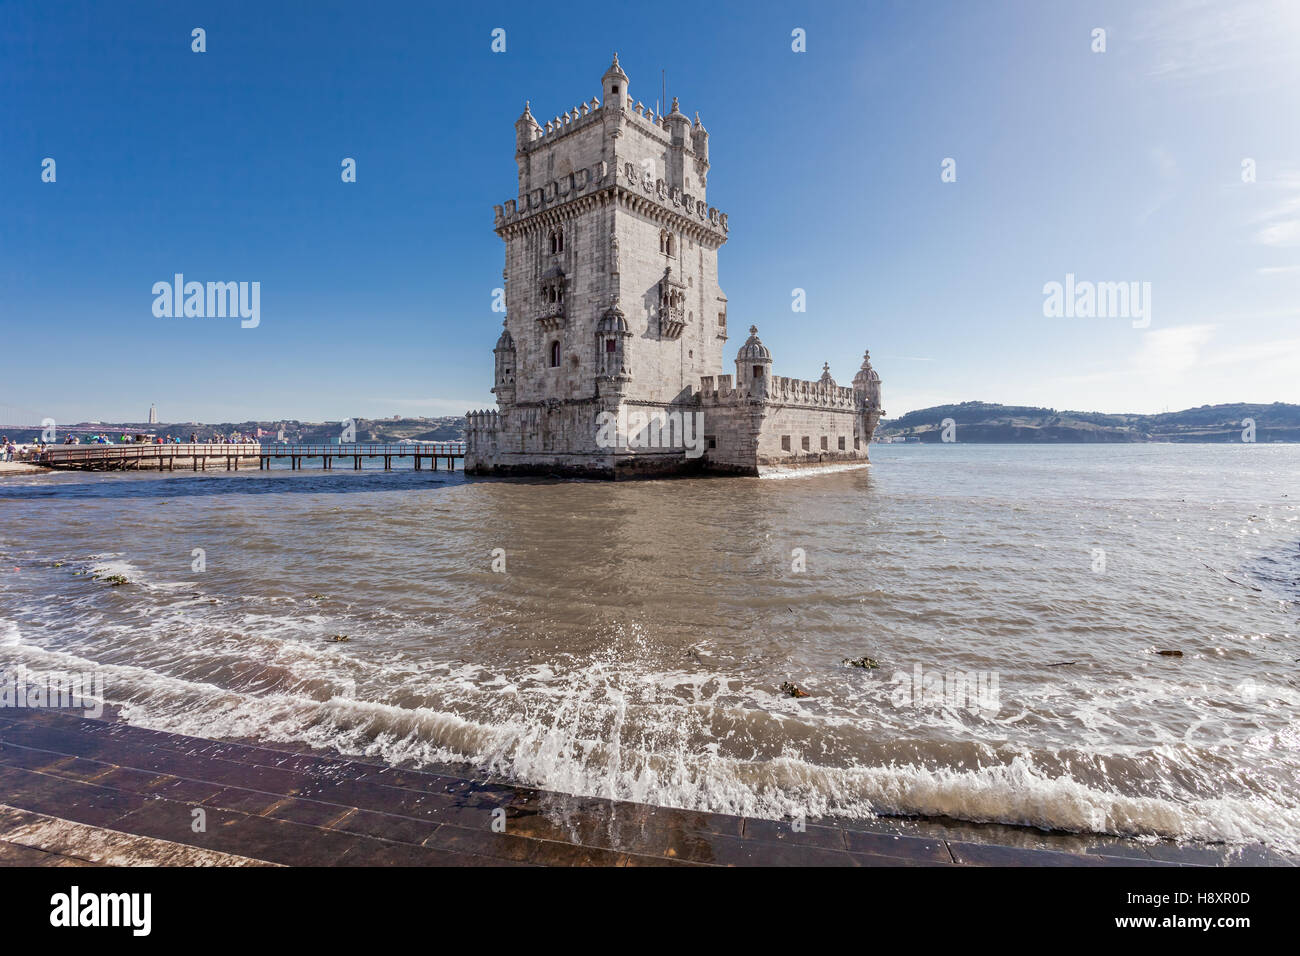 Lisbon, Portugal. Torre de Belem or Belem Tower in the Tagus River. UNESCO World Heritage. Stands as the best example of the Manuelino art. Stock Photo